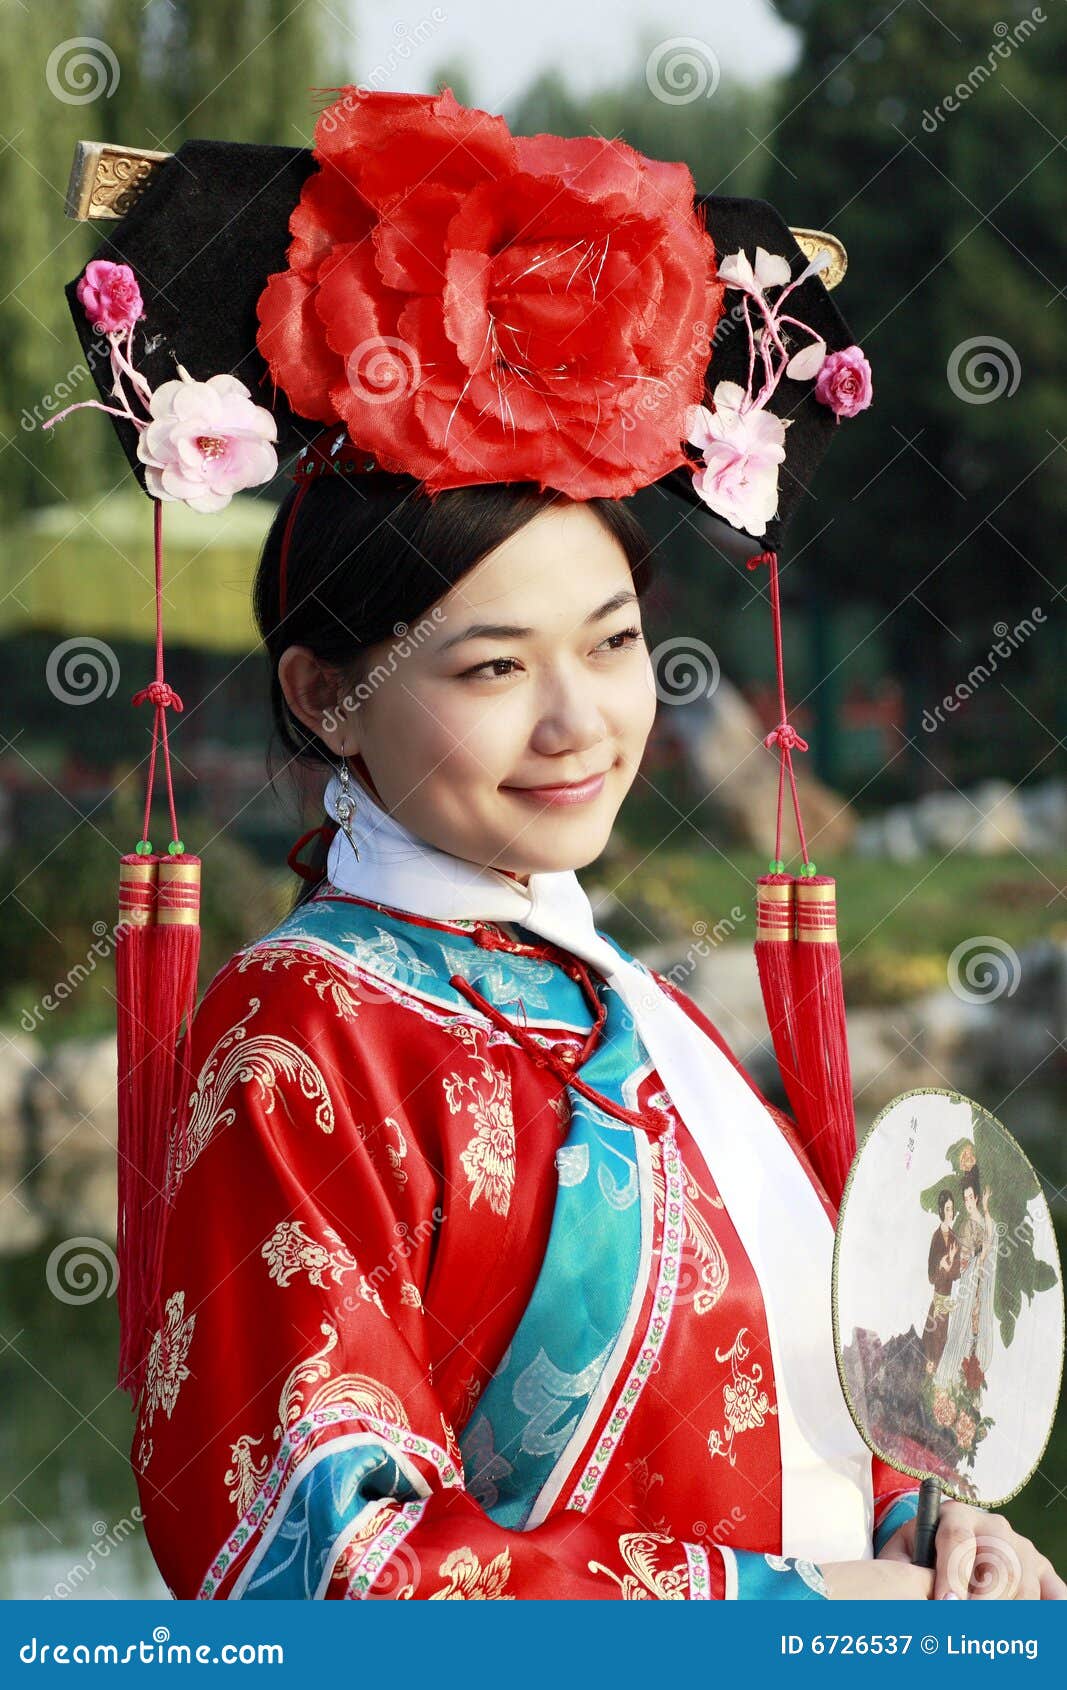 Chinese Girl in Ancient Dress Stock Image - Image of face, elegance ...